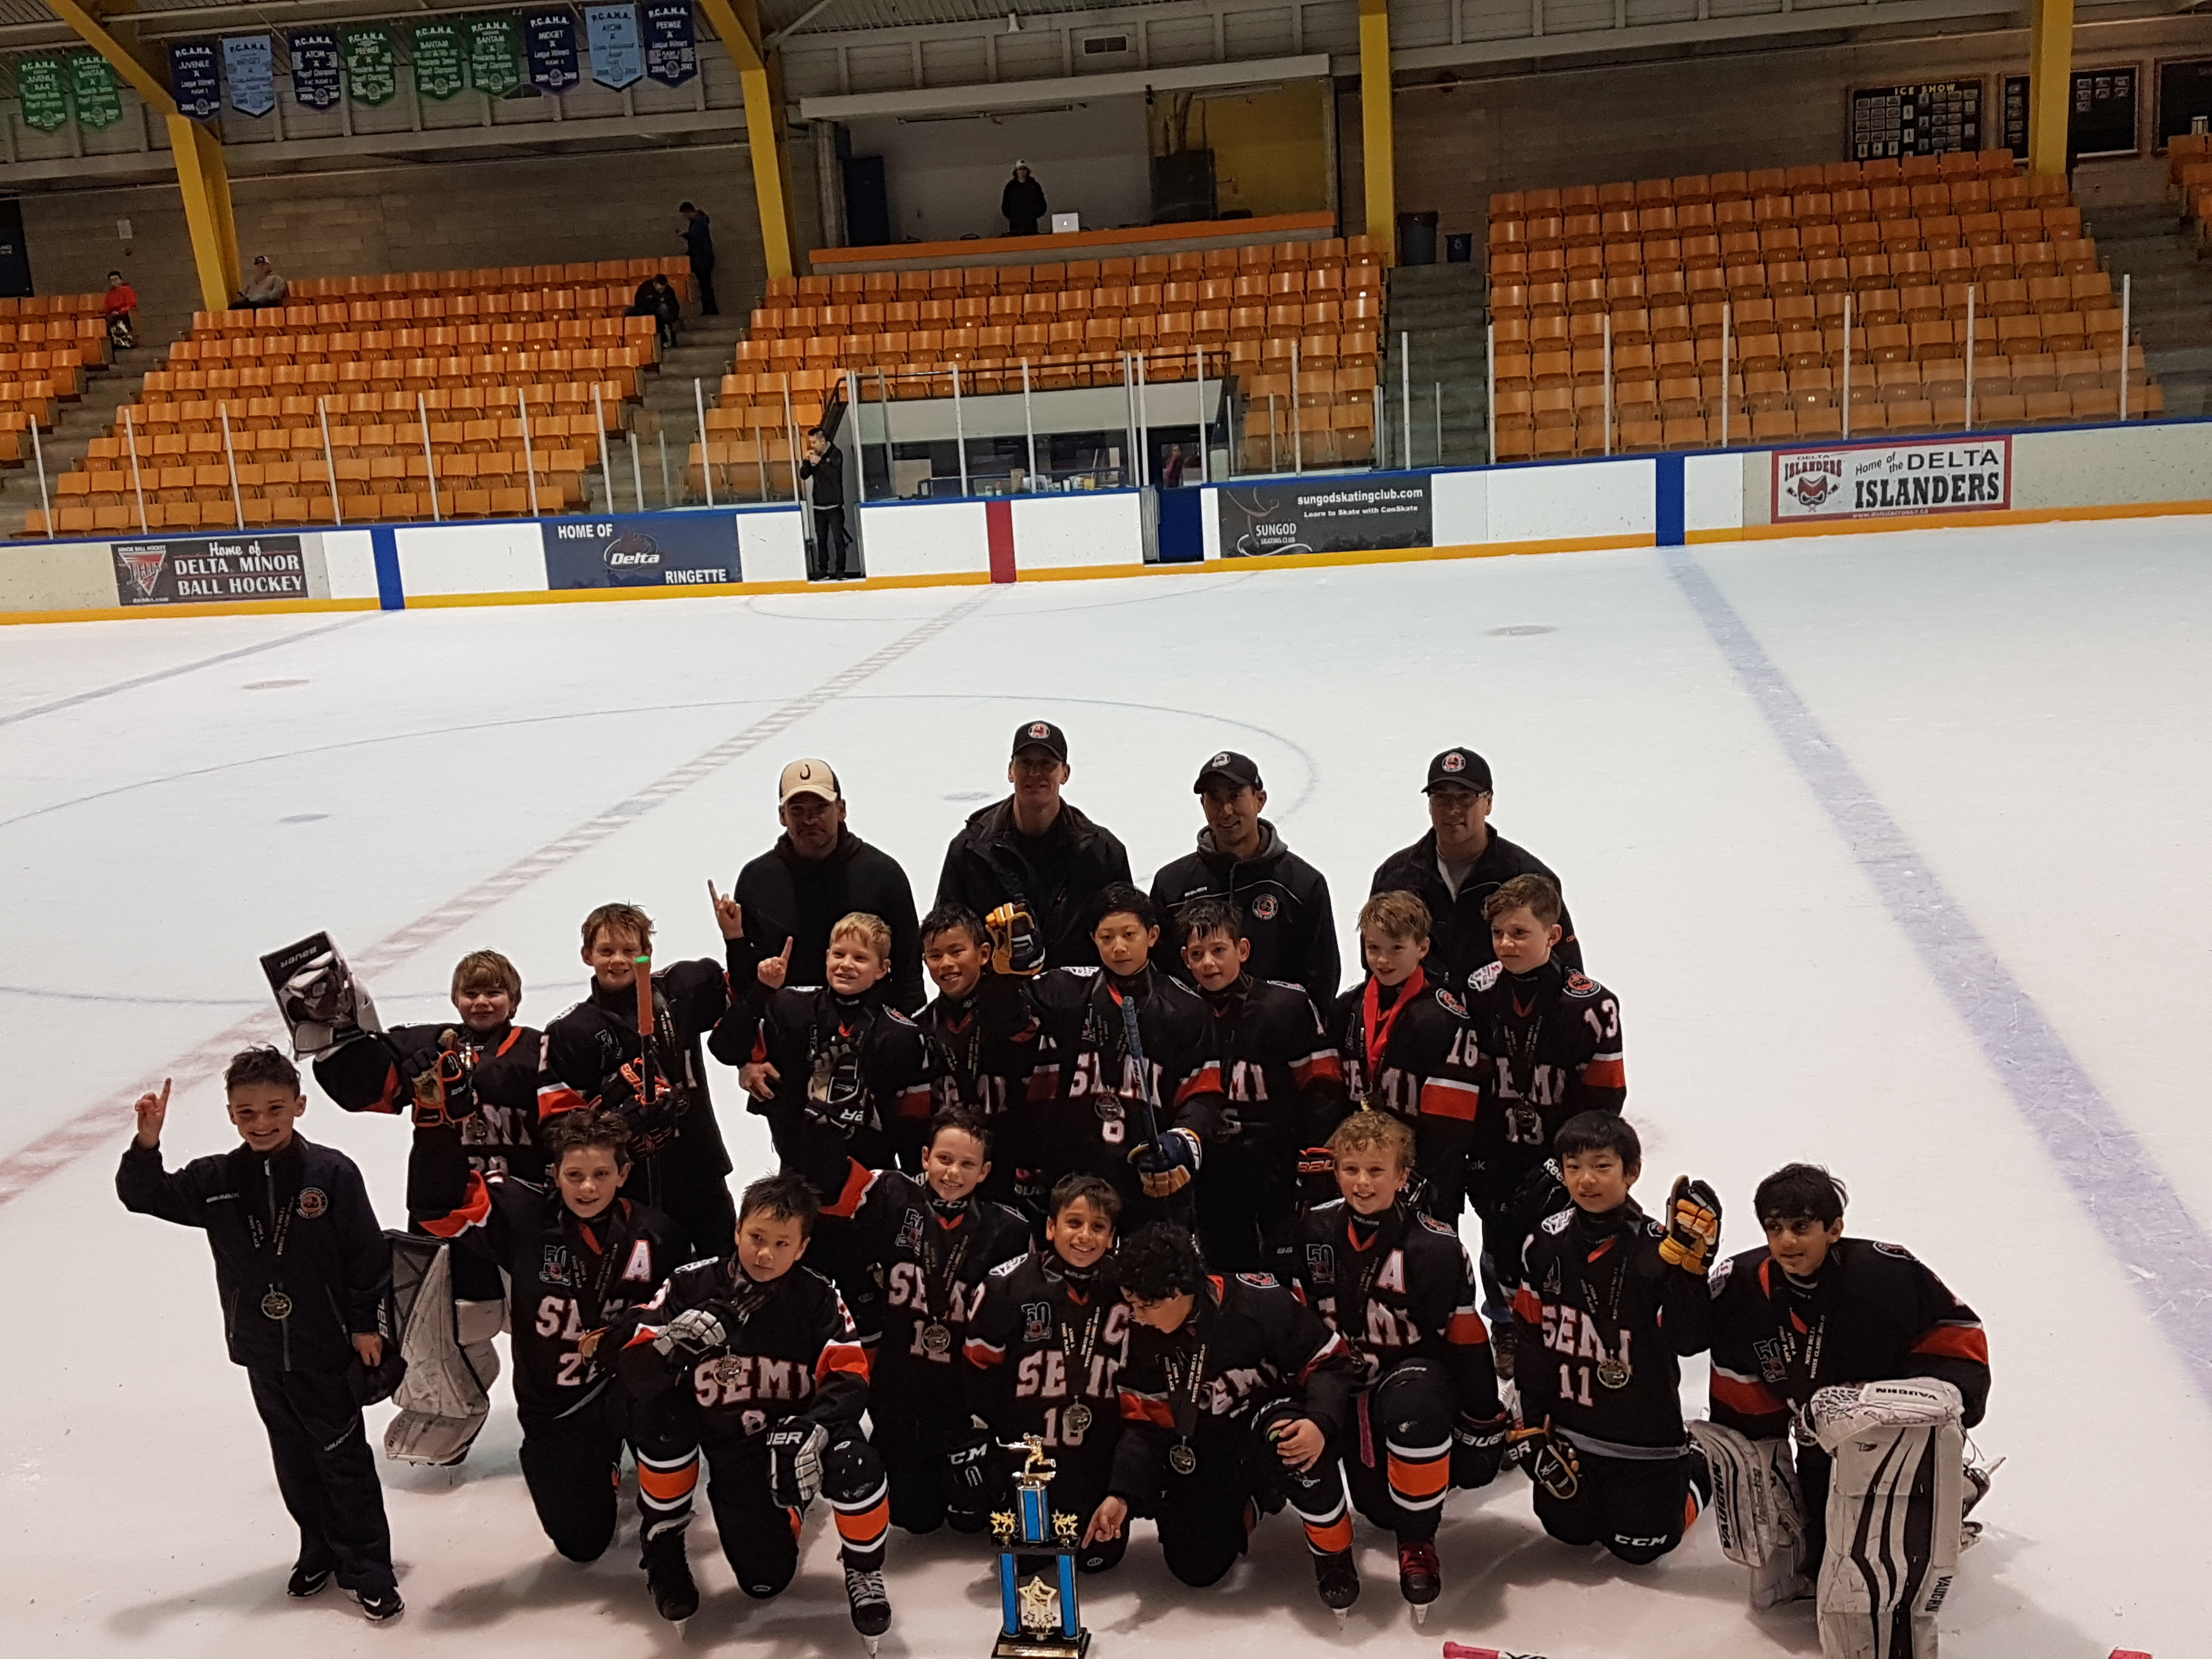 Atom A4 brings home GOLD from the Tier IV North Delta Winter Classic on Jan 5th